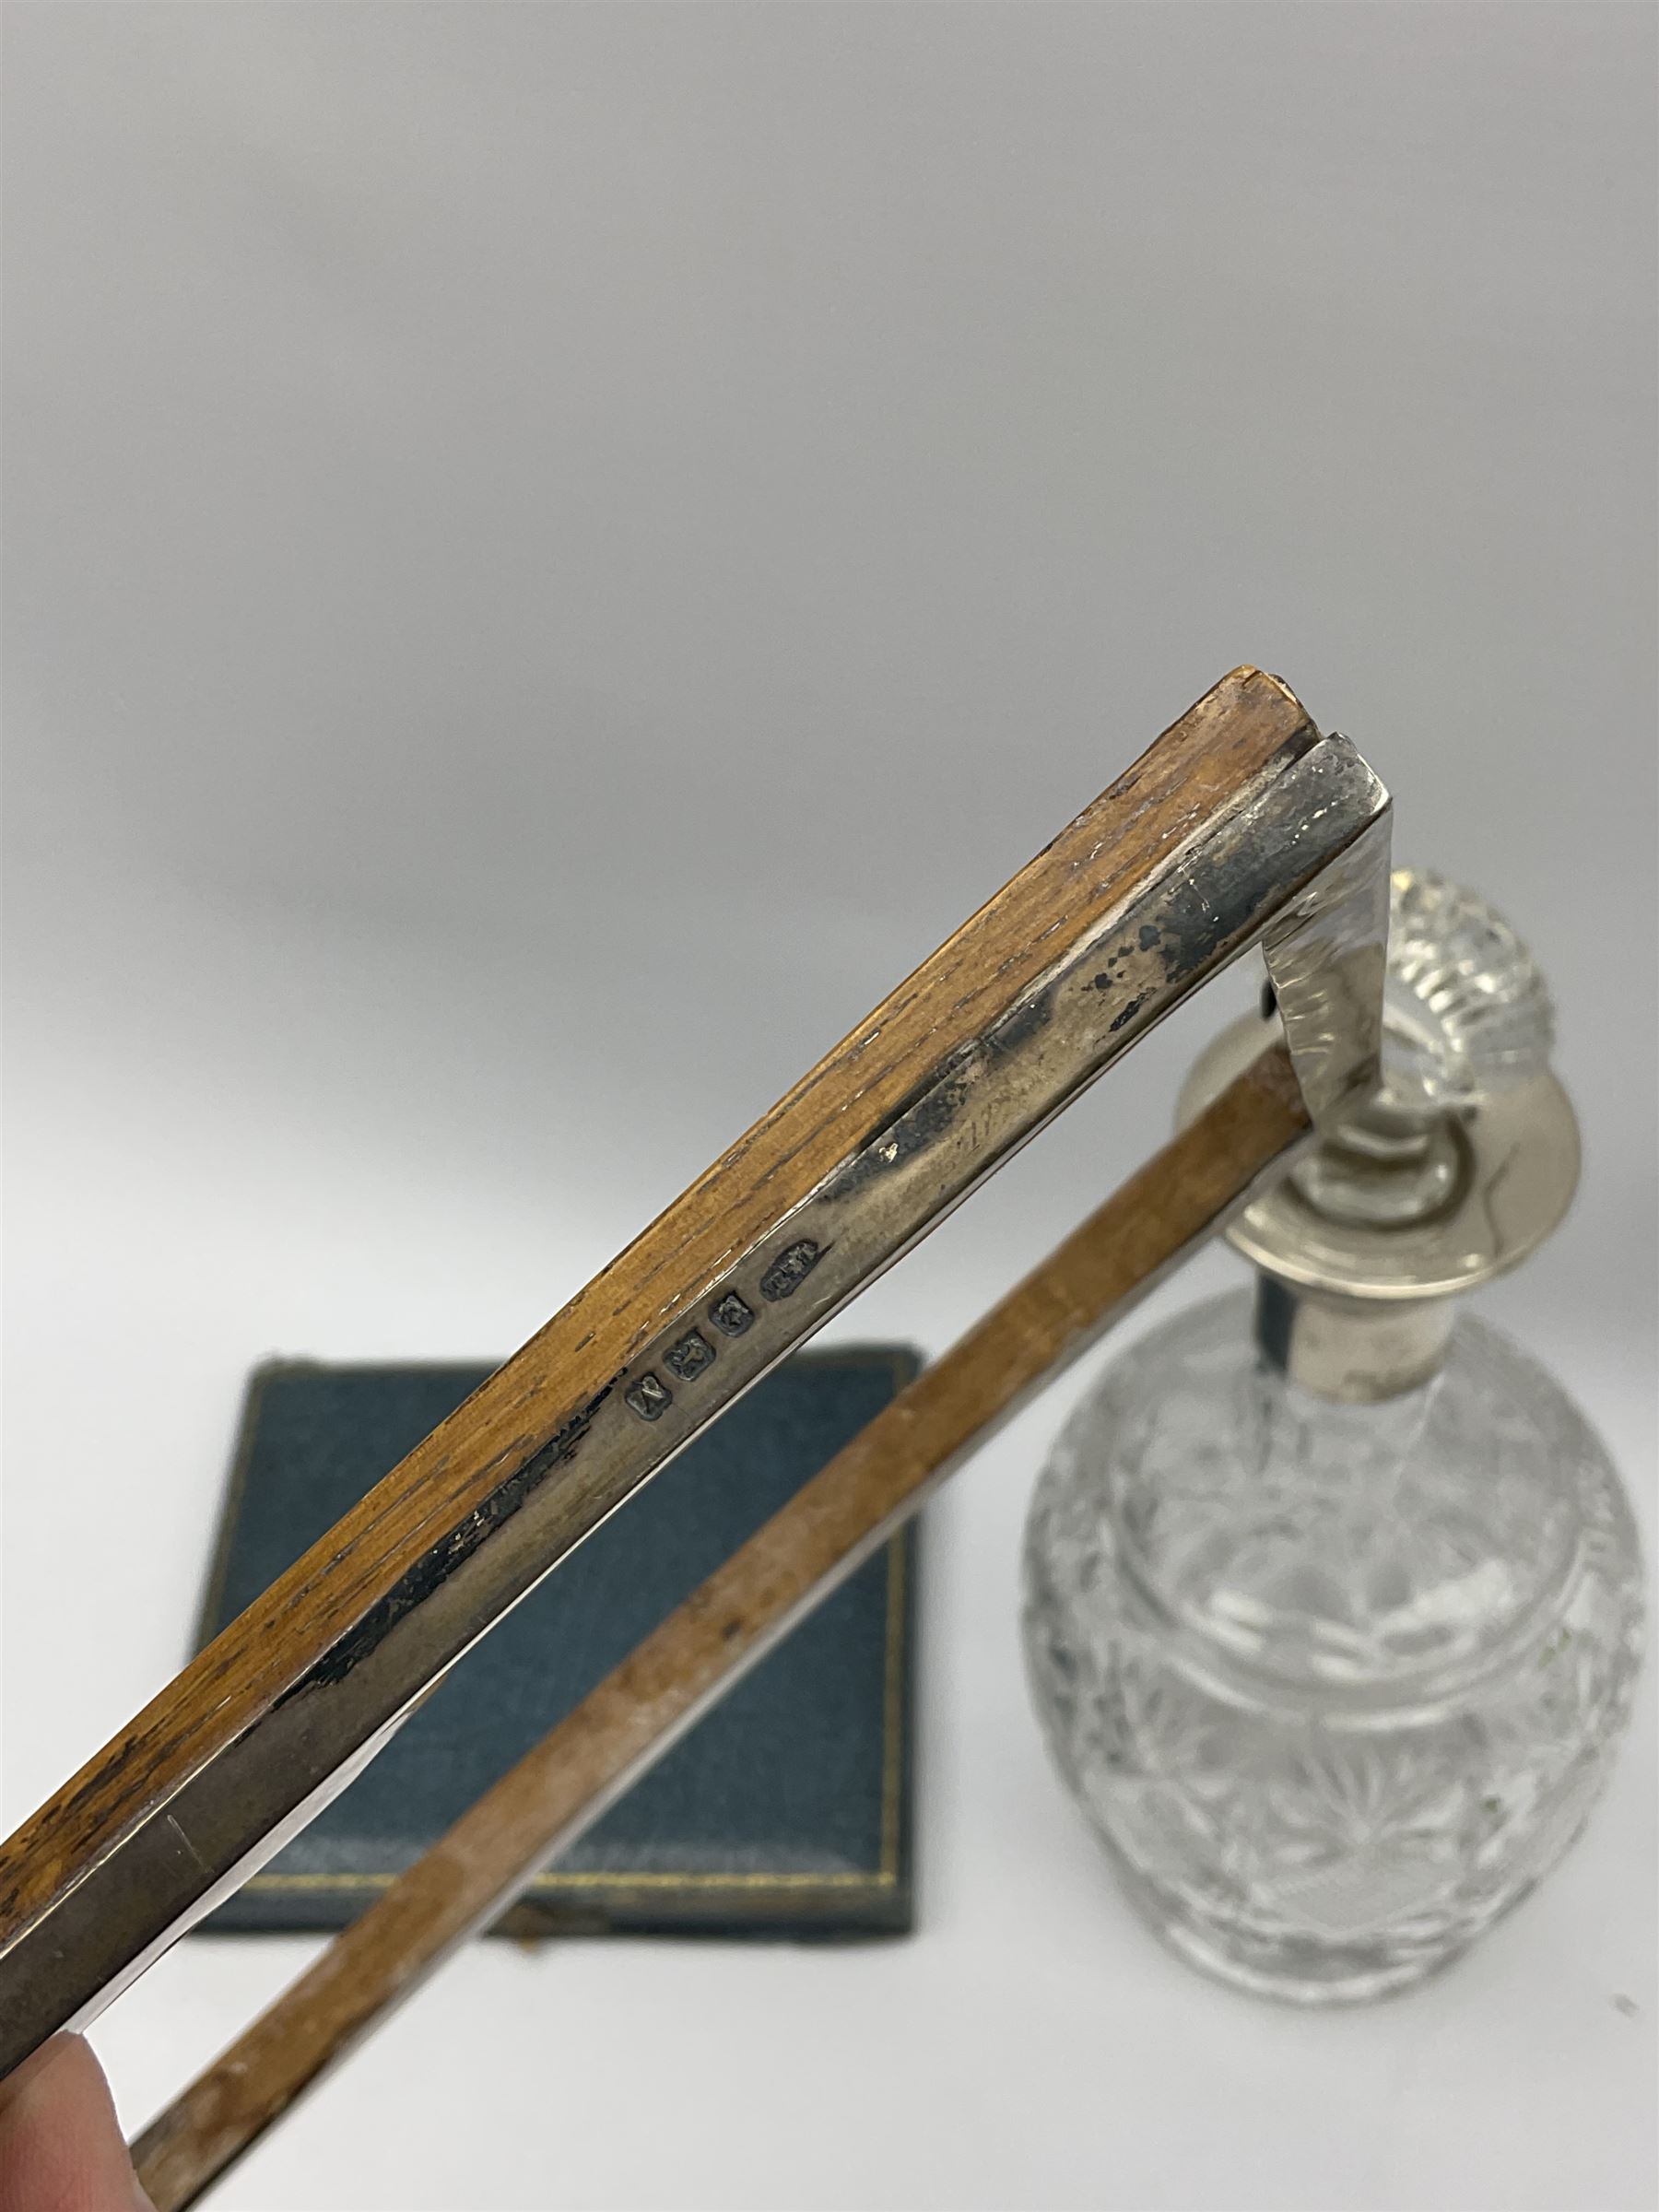 Decanter with hallmarked silver collar and glass stopper - Image 5 of 5